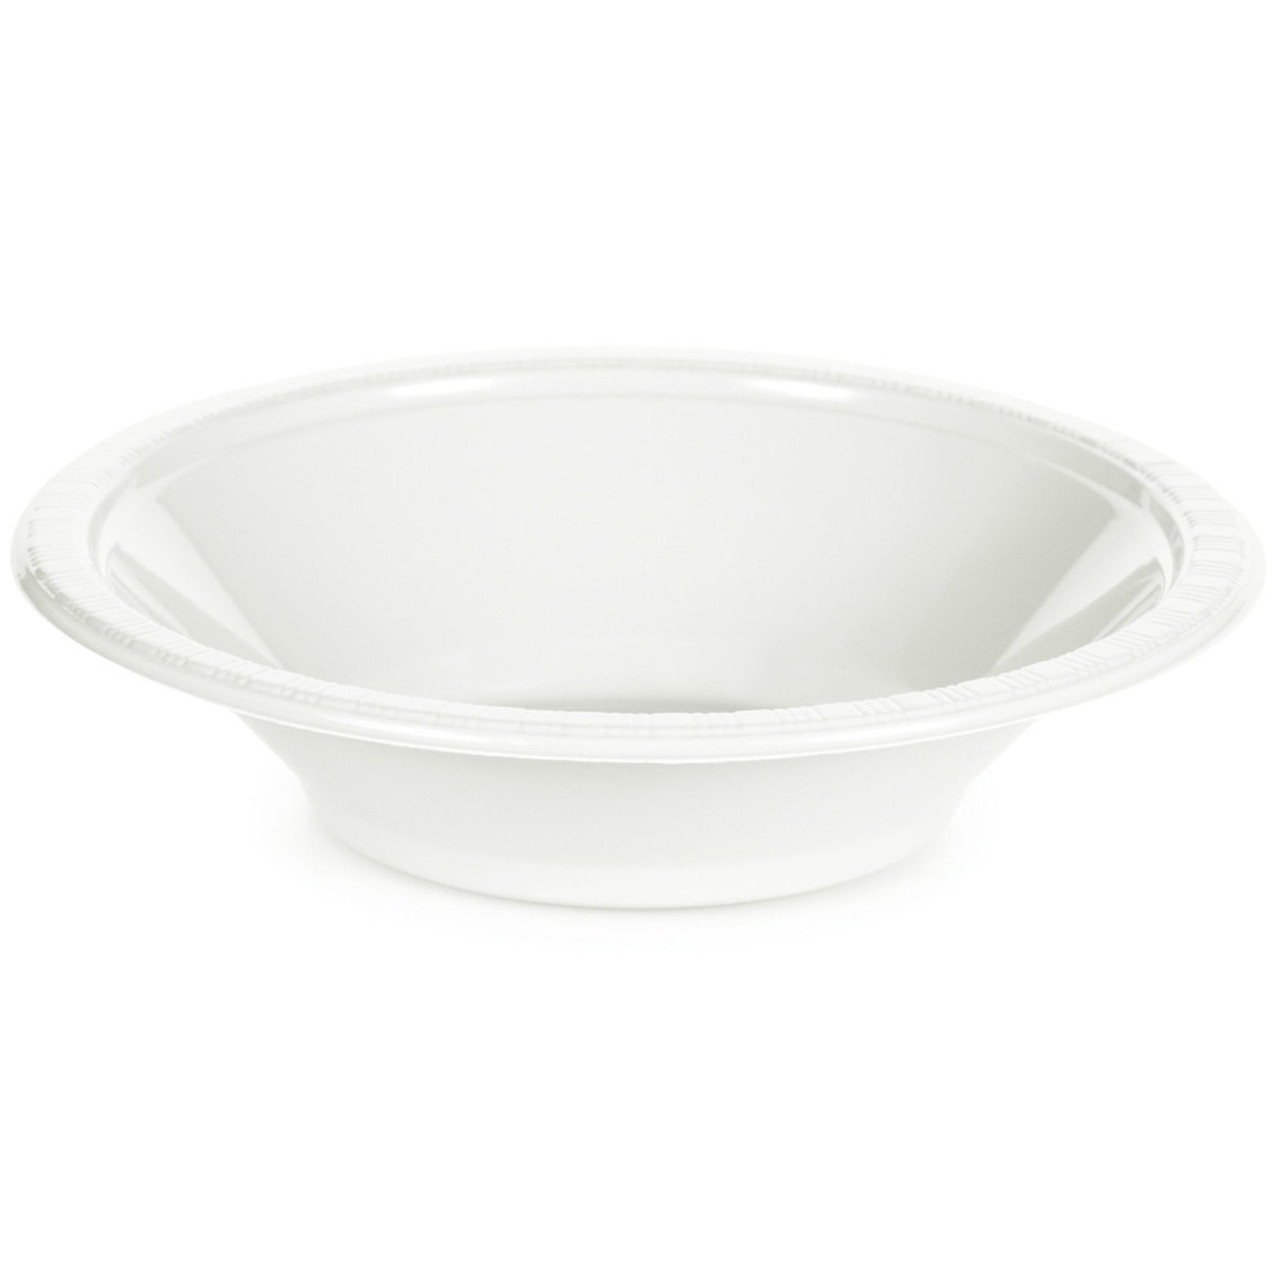 Club Pack of 240 White Round Disposable Party Bowls 12 oz